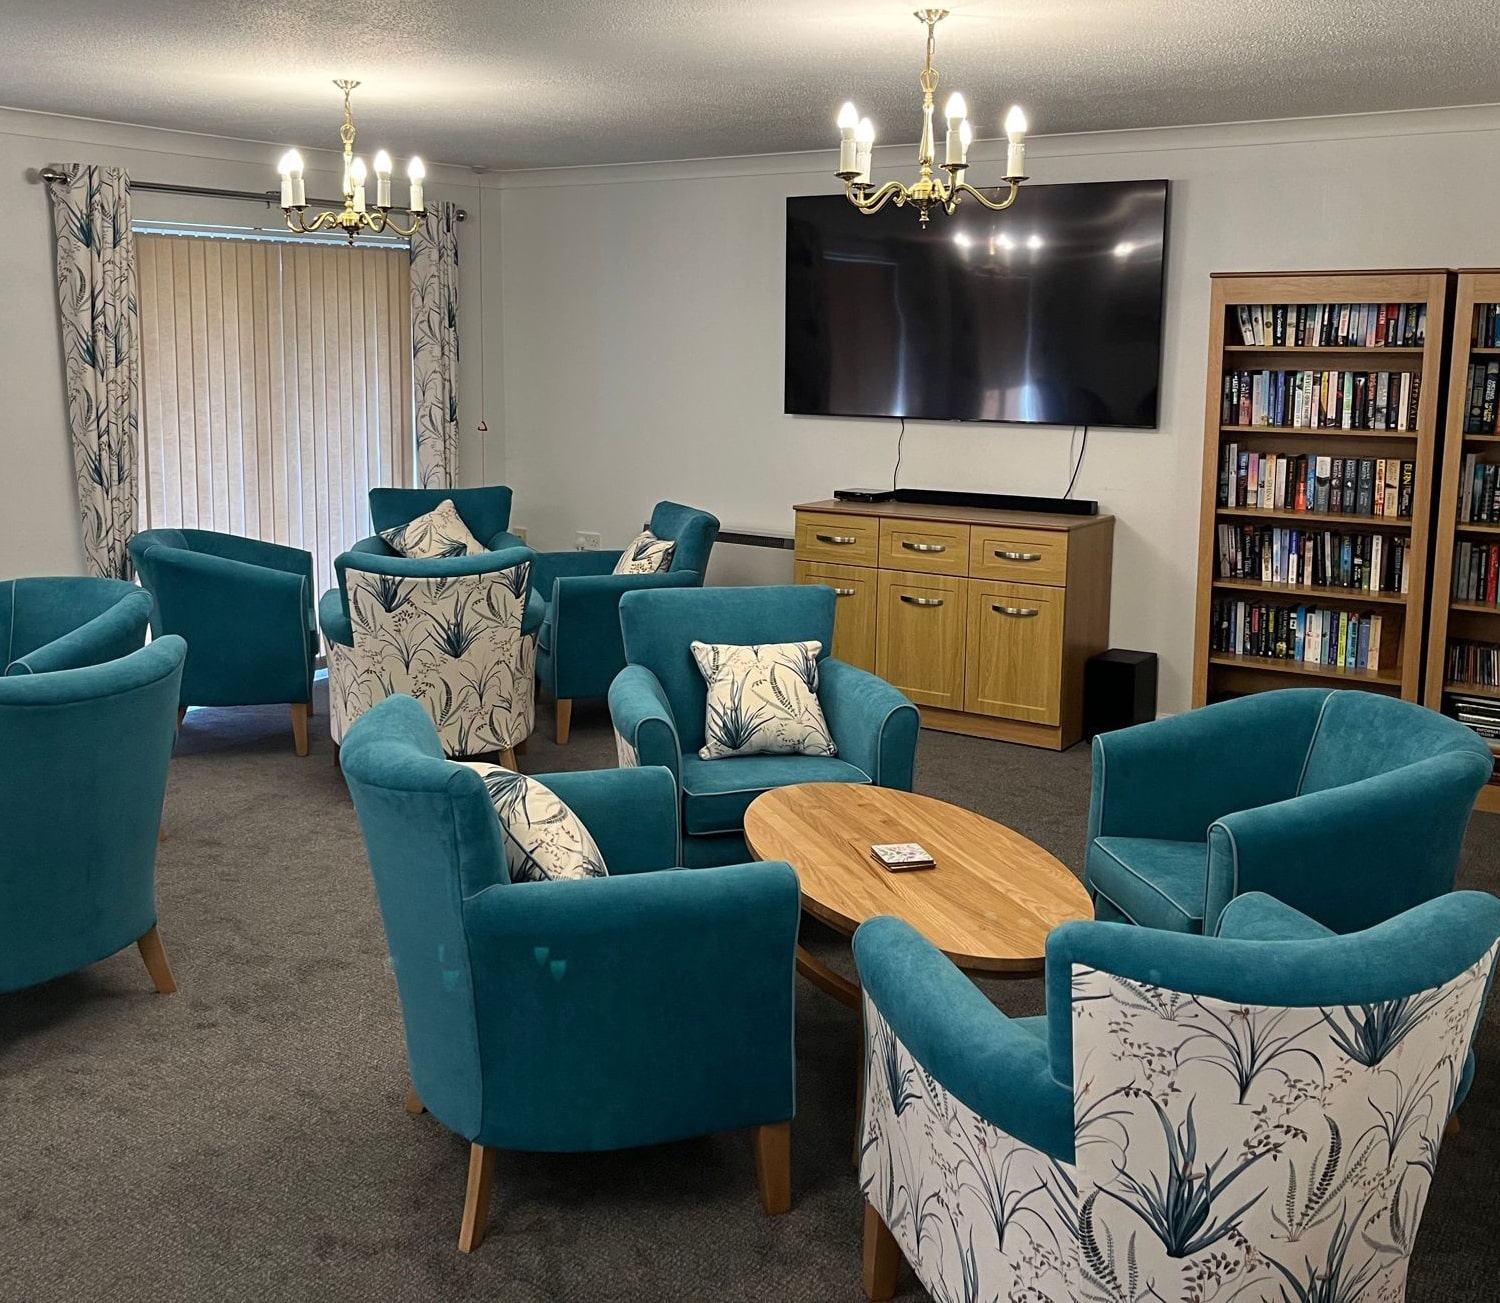 Springwood Court teal tub chairs